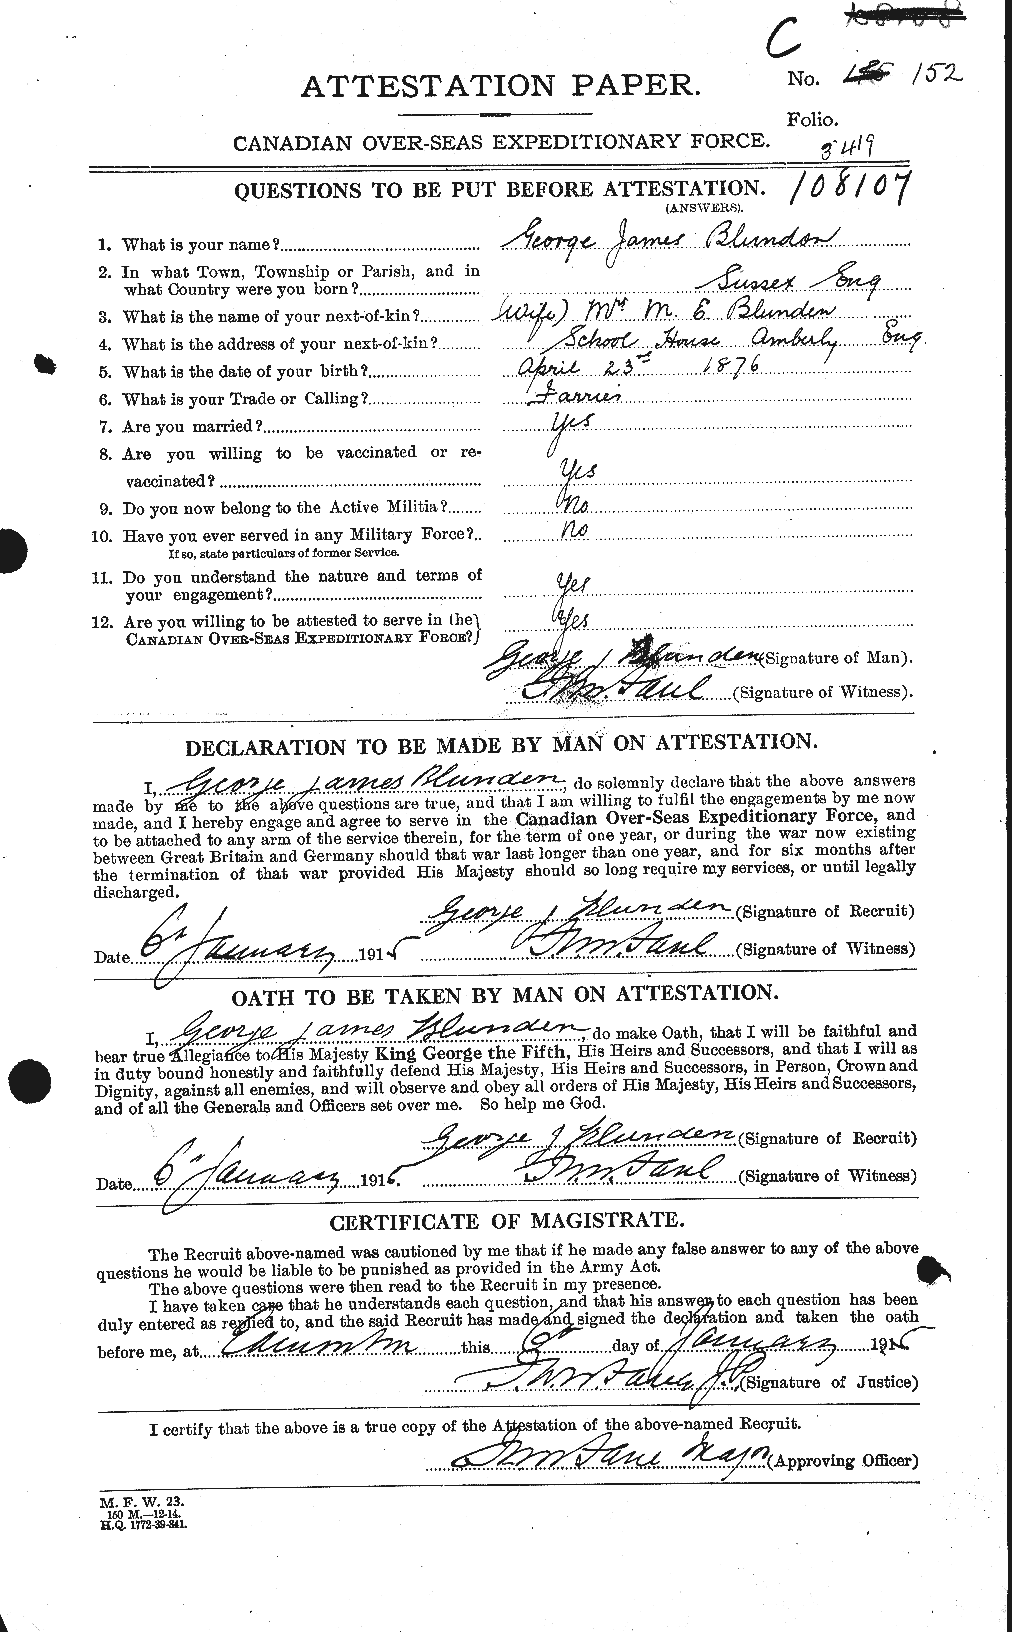 Personnel Records of the First World War - CEF 247227a